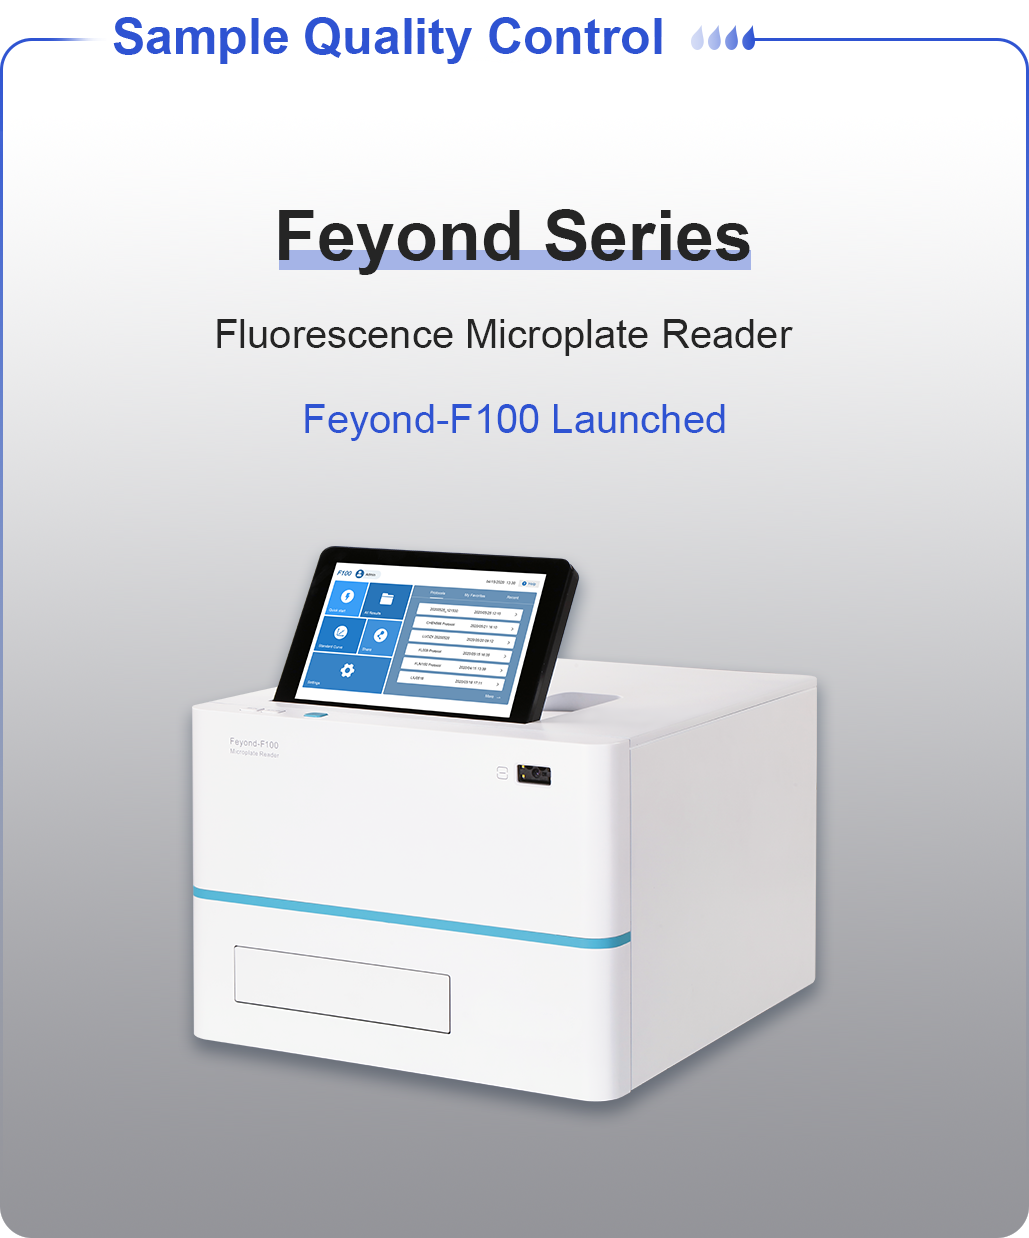 Feyond Series. Fluorescence Microplate Reader. Feyond-F100 Launched.